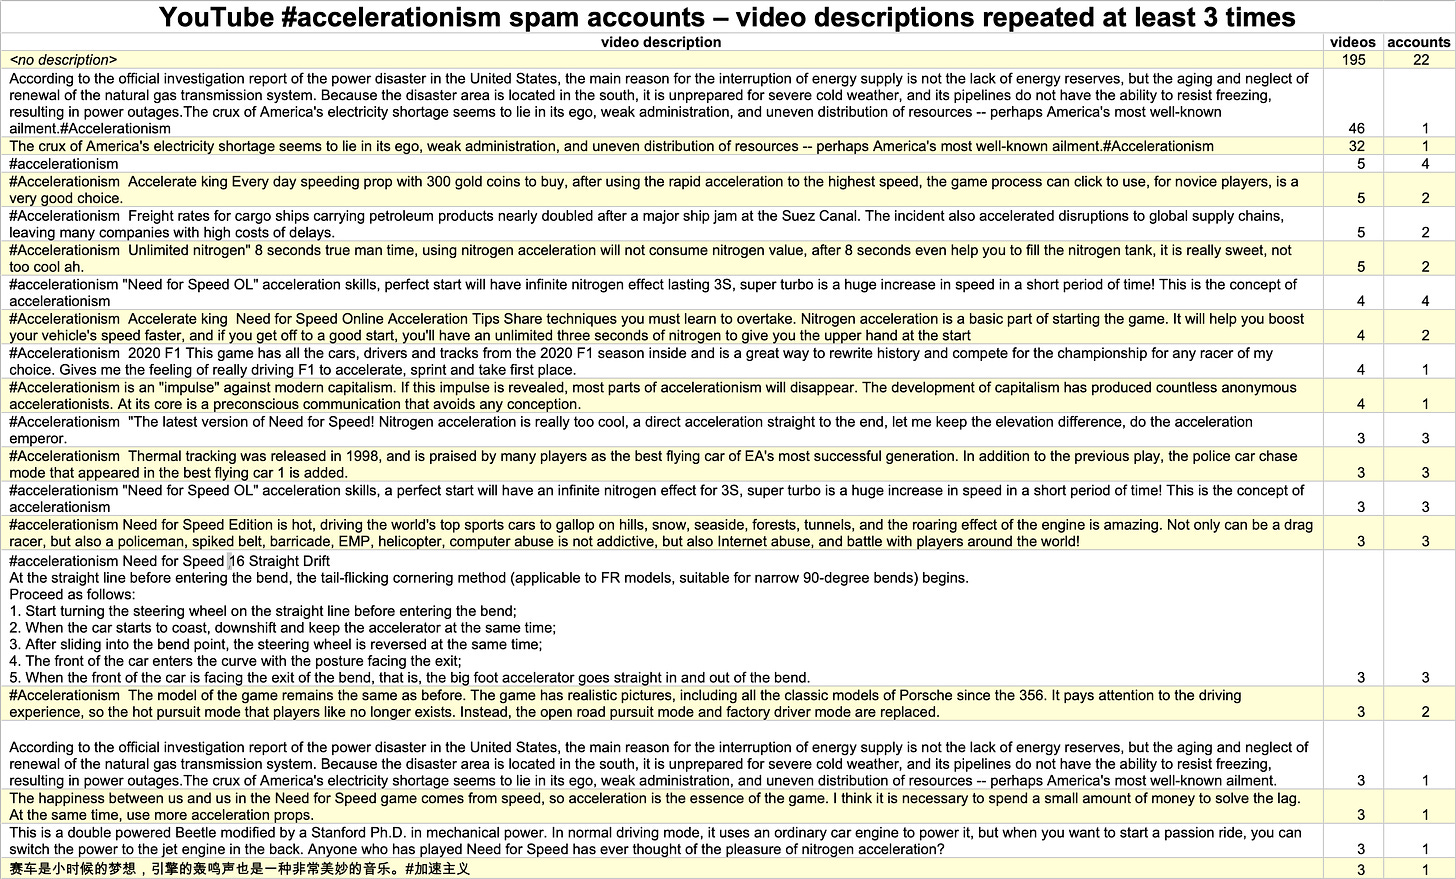 table of video descriptions used at least three times by YouTube #accelerationism spam accounts